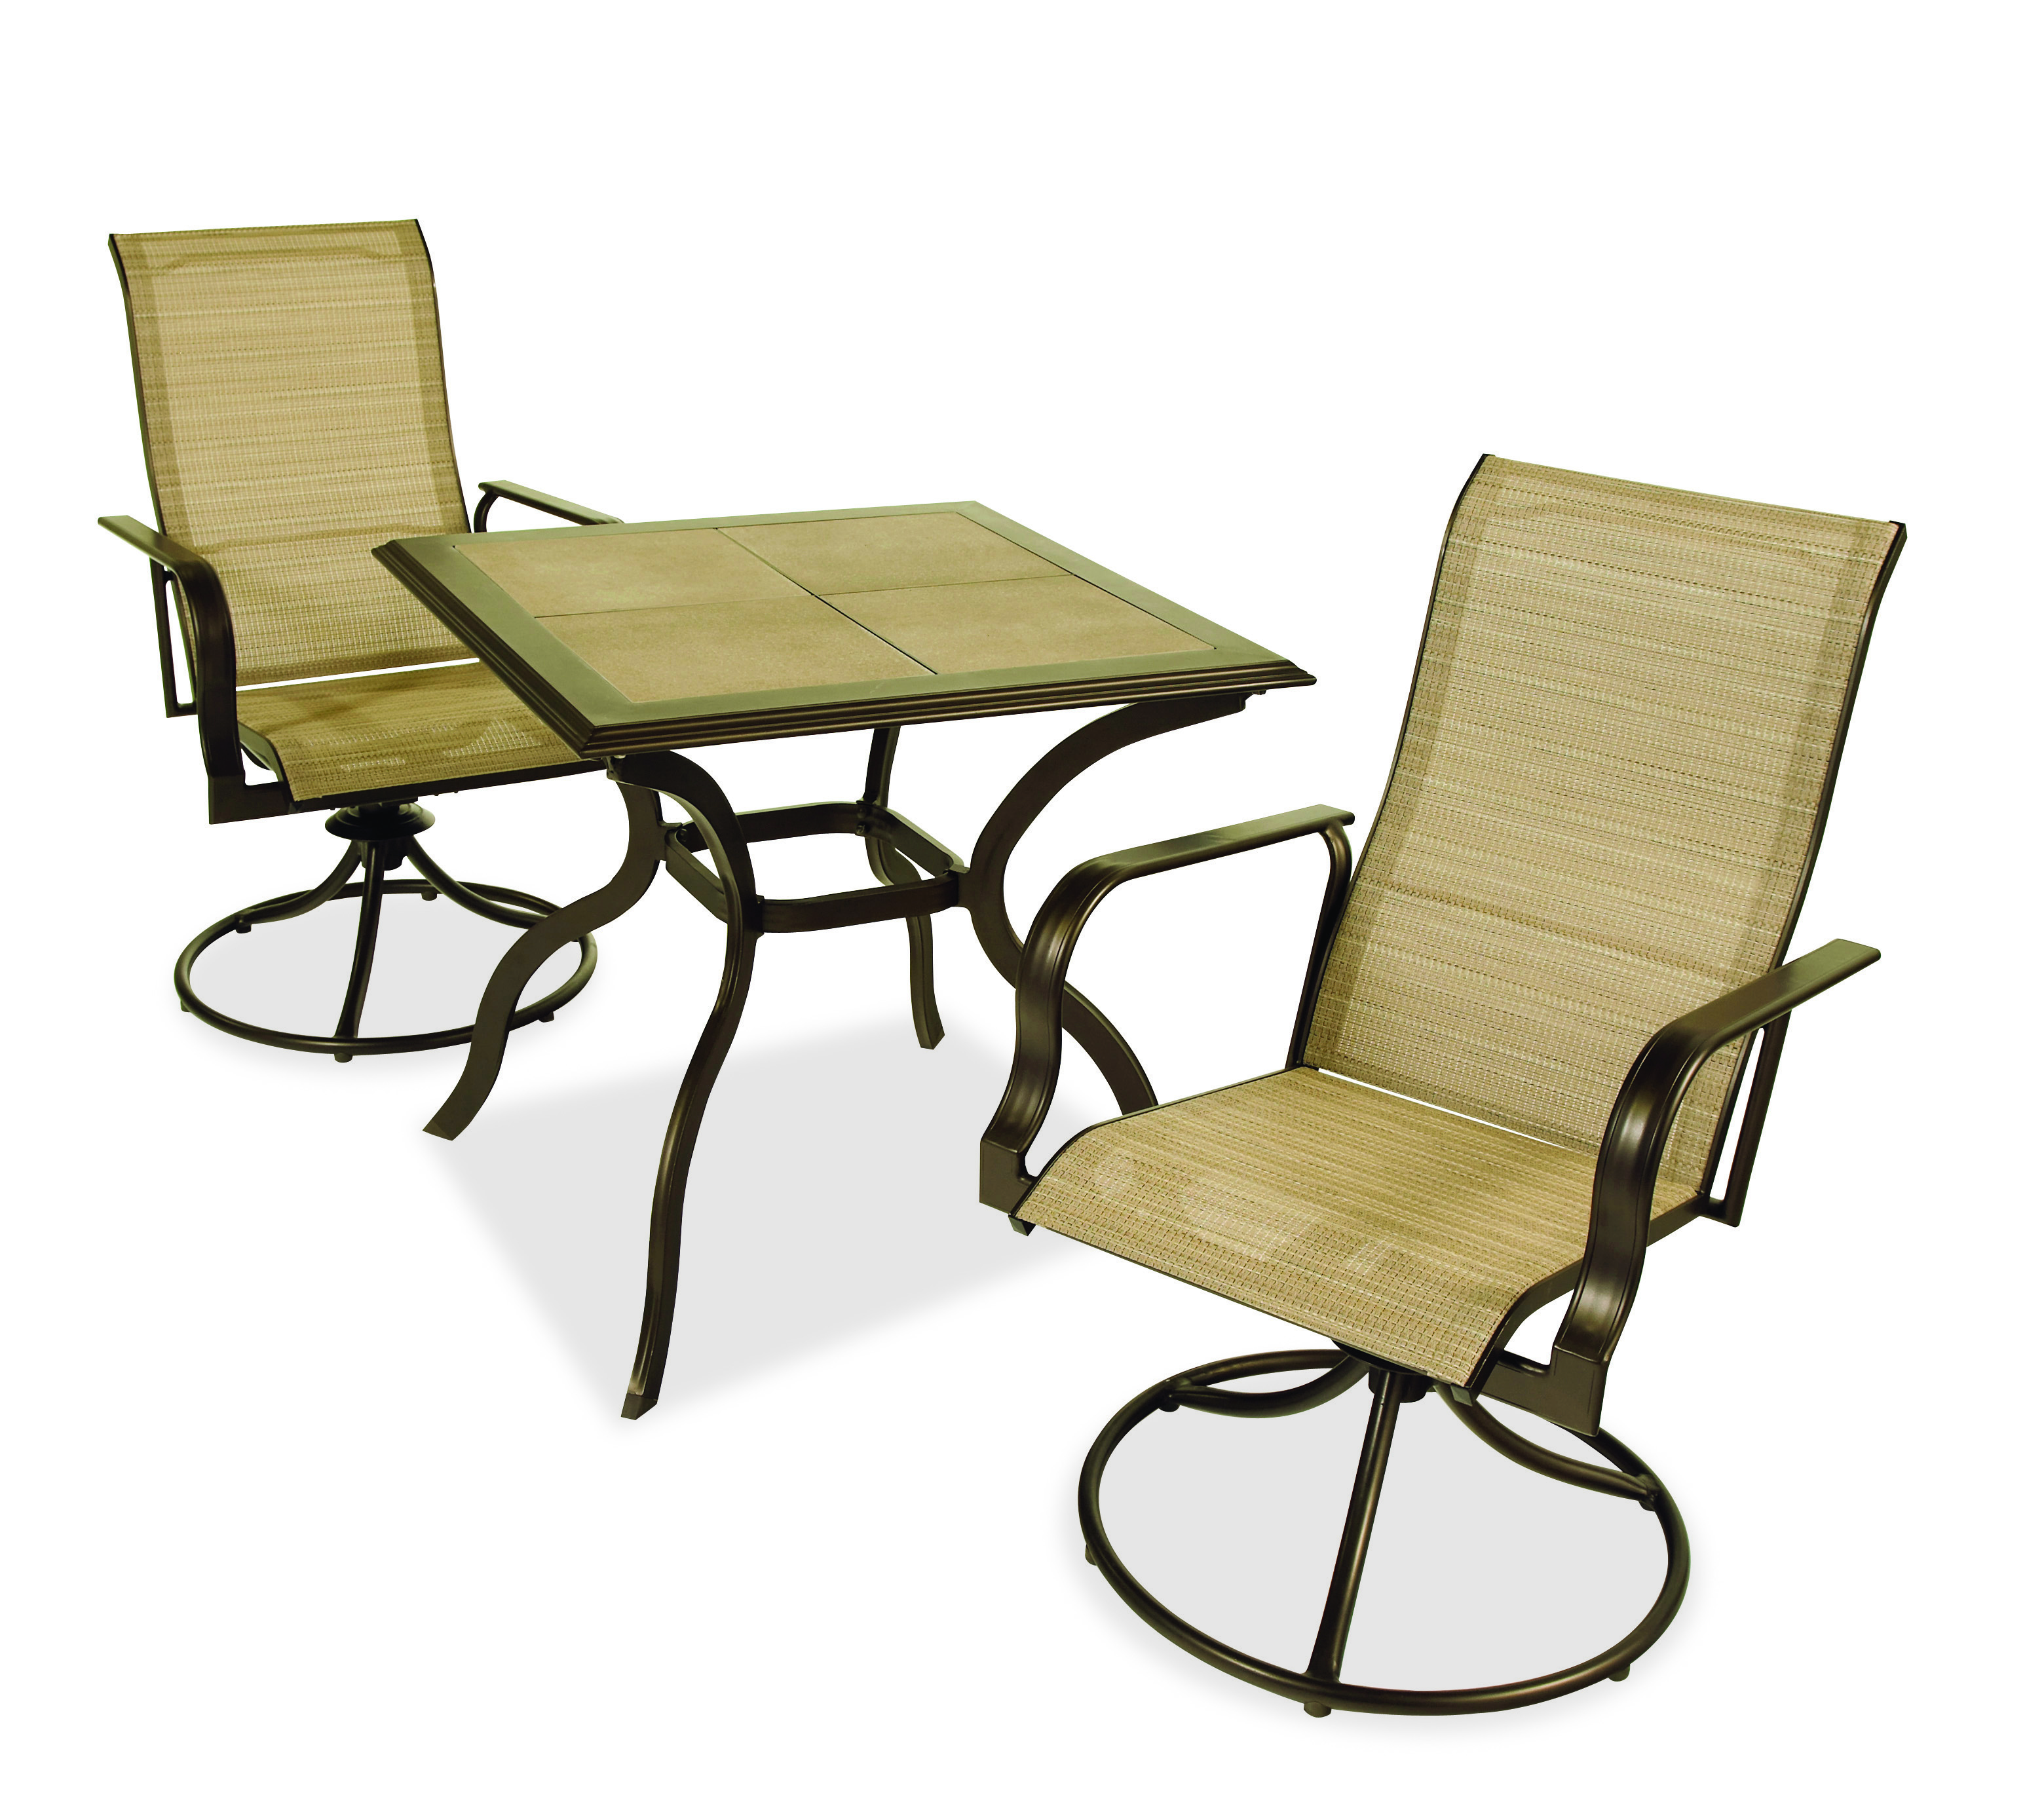 Casual Living Worldwide Recalls Swivel Patio Chairs Due to Fall ...